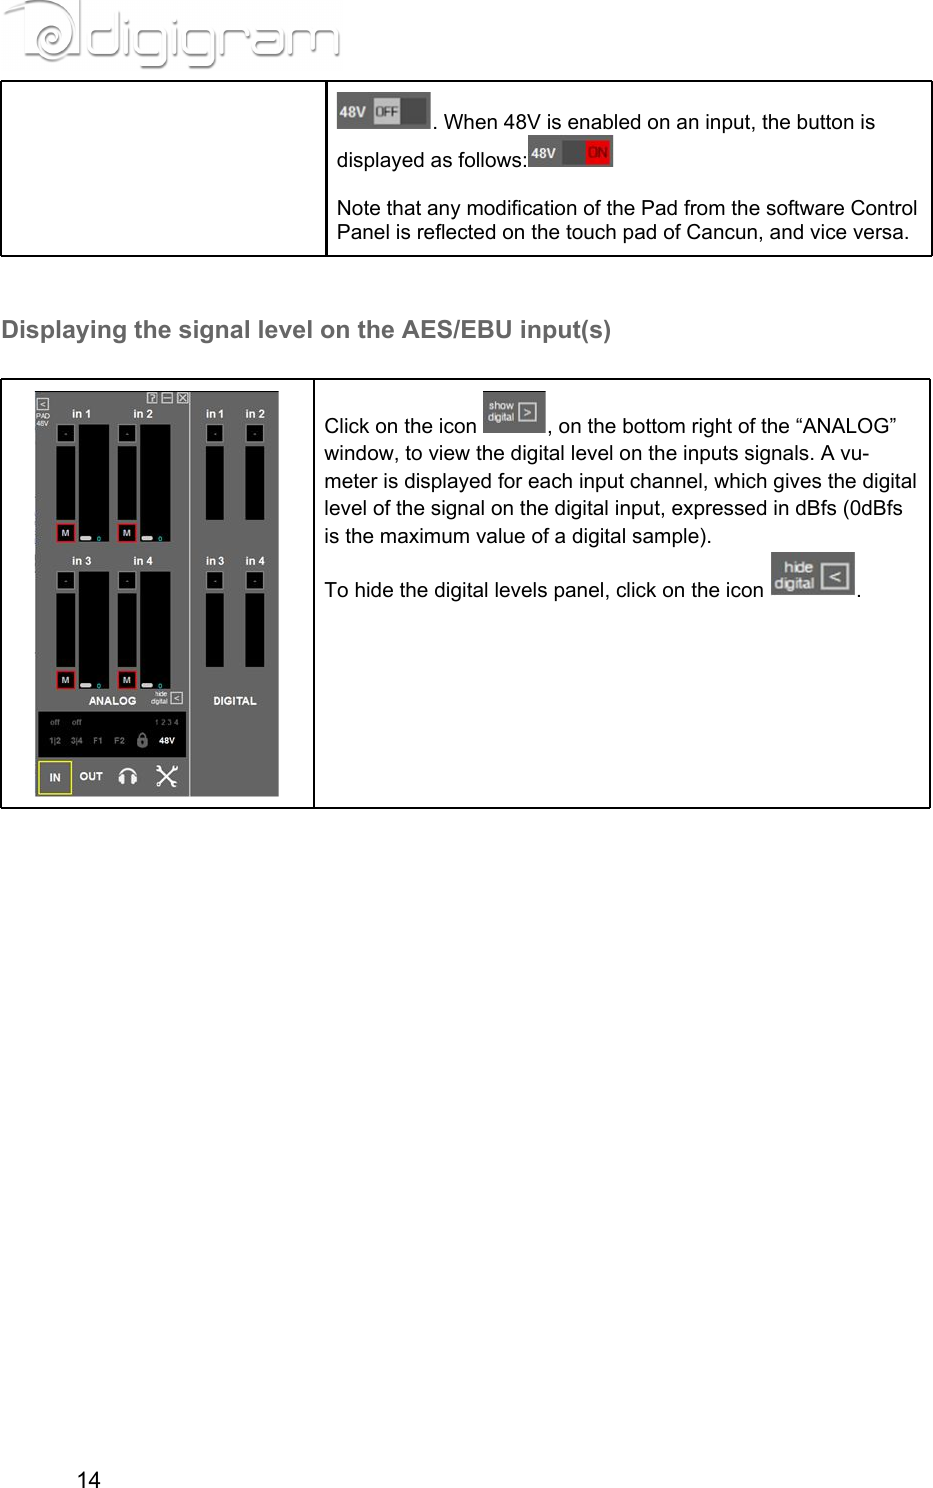 . When 48V is enabled on an input, the button is displayed as follows:  Note that any modification of the Pad from the software Control Panel is reflected on the touch pad of Cancun, and vice versa.  Displaying the signal level on the AES/EBU input(s)  Click on the icon  , on the bottom right of the “ANALOG” window, to view the digital level on the inputs signals. A vu-meter is displayed for each input channel, which gives the digital level of the signal on the digital input, expressed in dBfs (0dBfs is the maximum value of a digital sample).To hide the digital levels panel, click on the icon  .       14